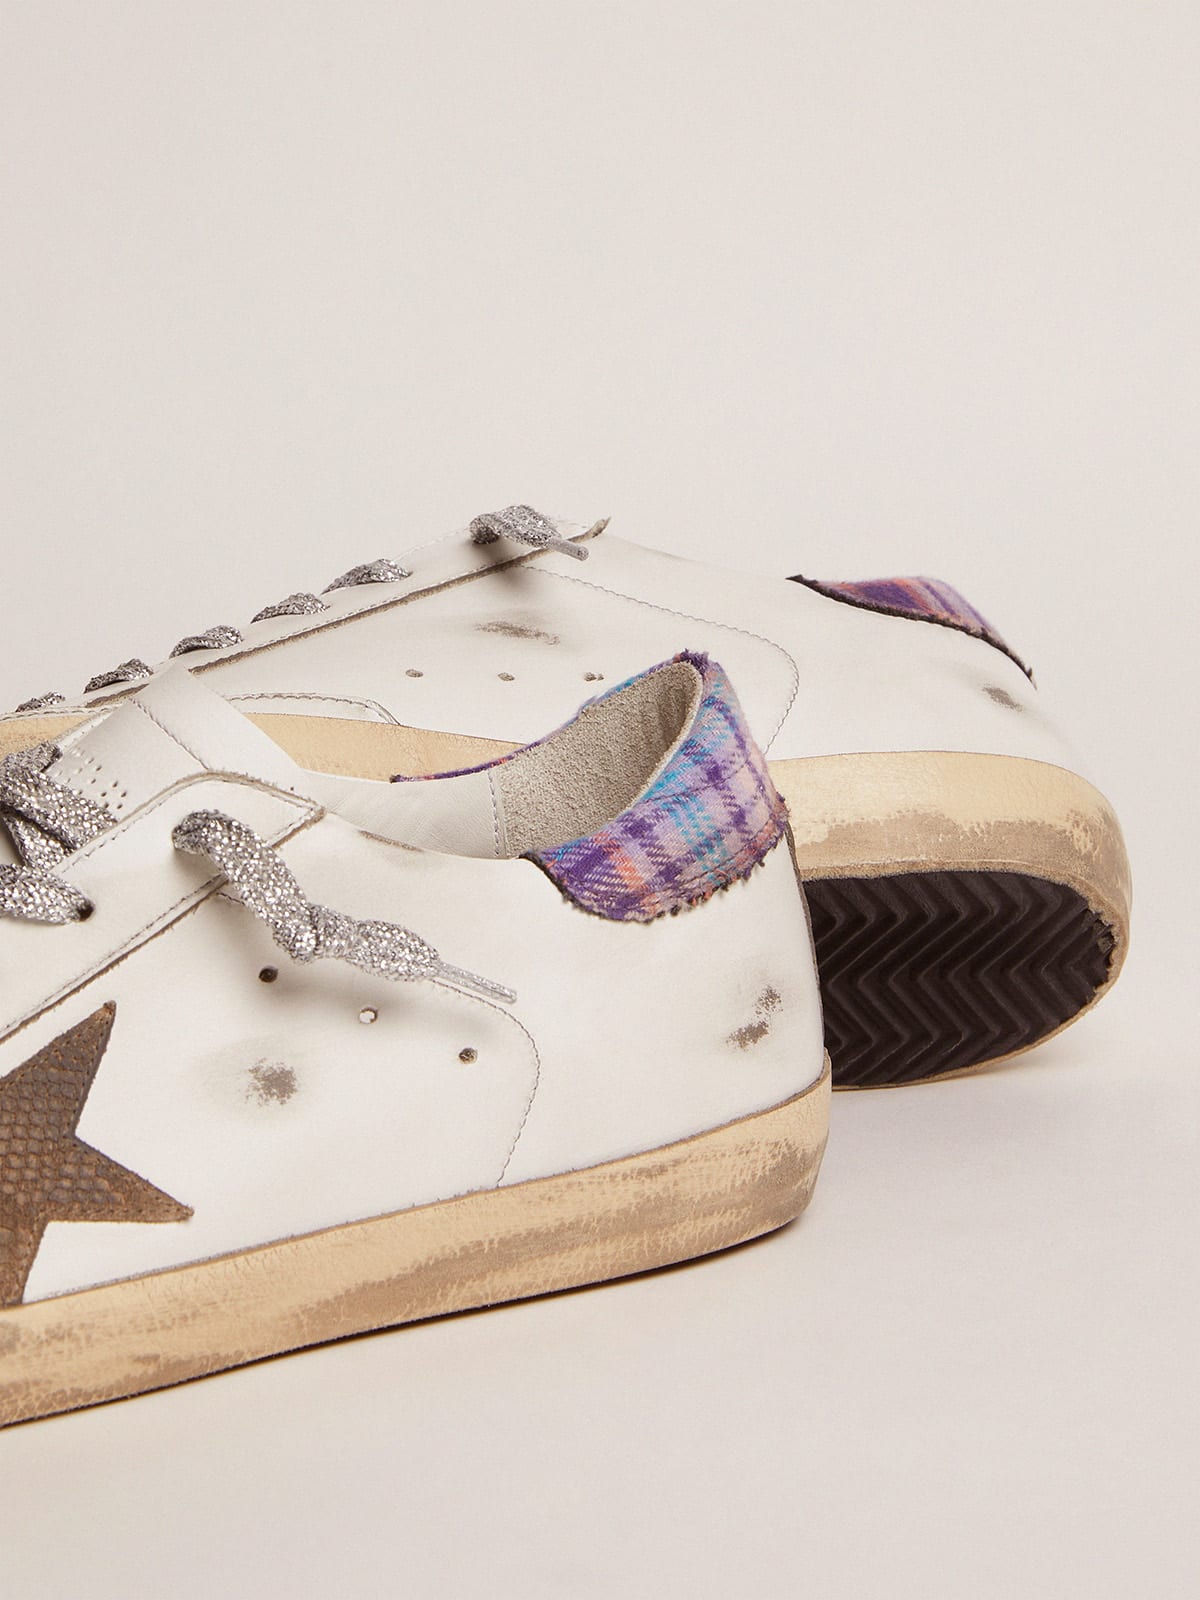 Golden Goose - Super-Star sneakers with jacquard heel tab and snake-print suede star in 